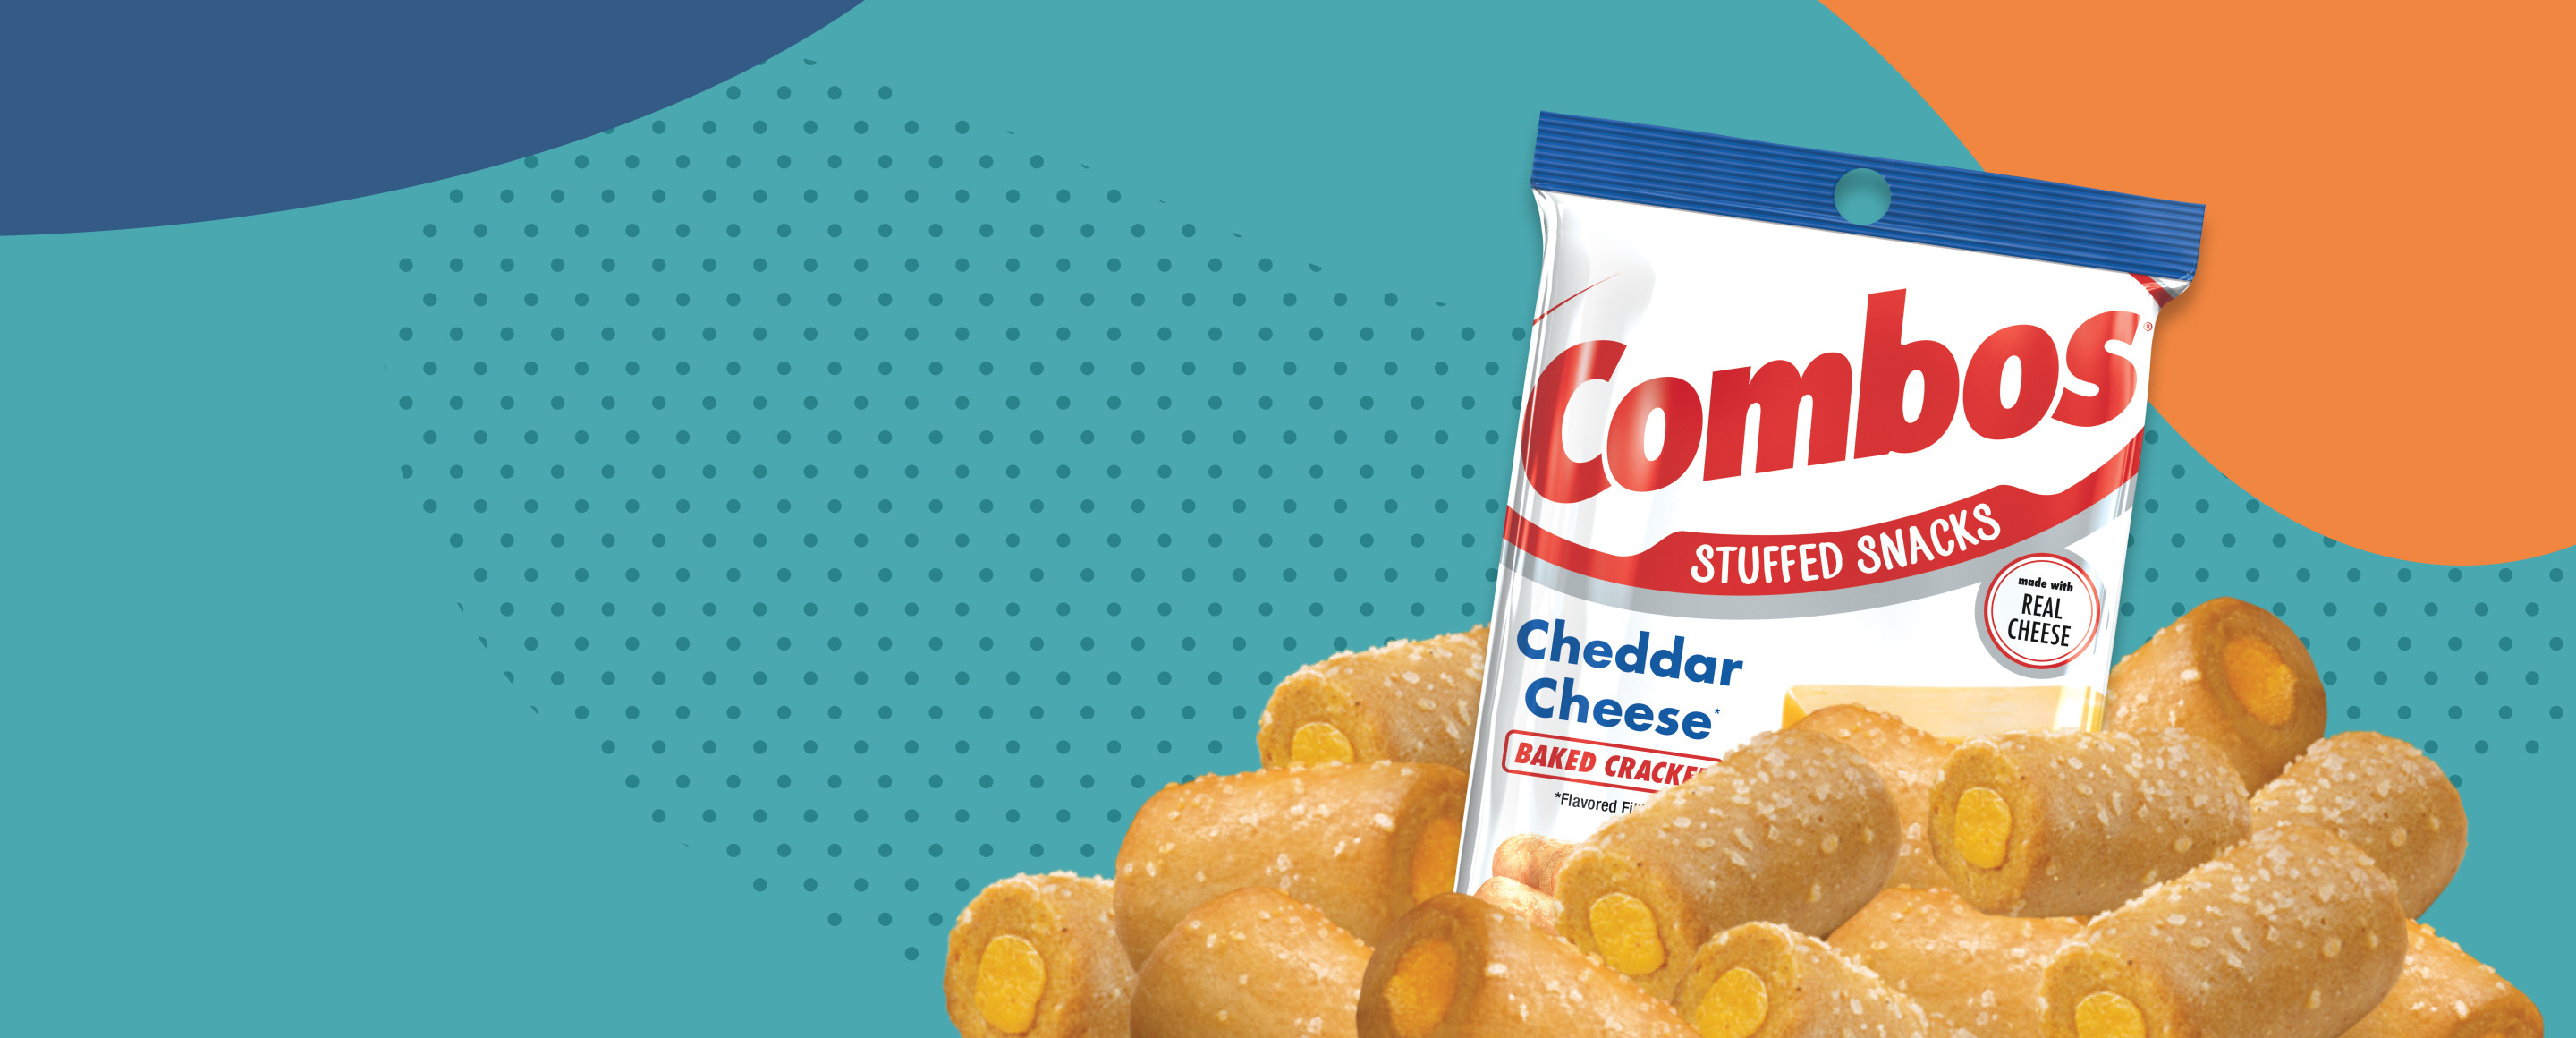 Bag of Cheddar Cheese Combos on top of Combos on a blue dotted background